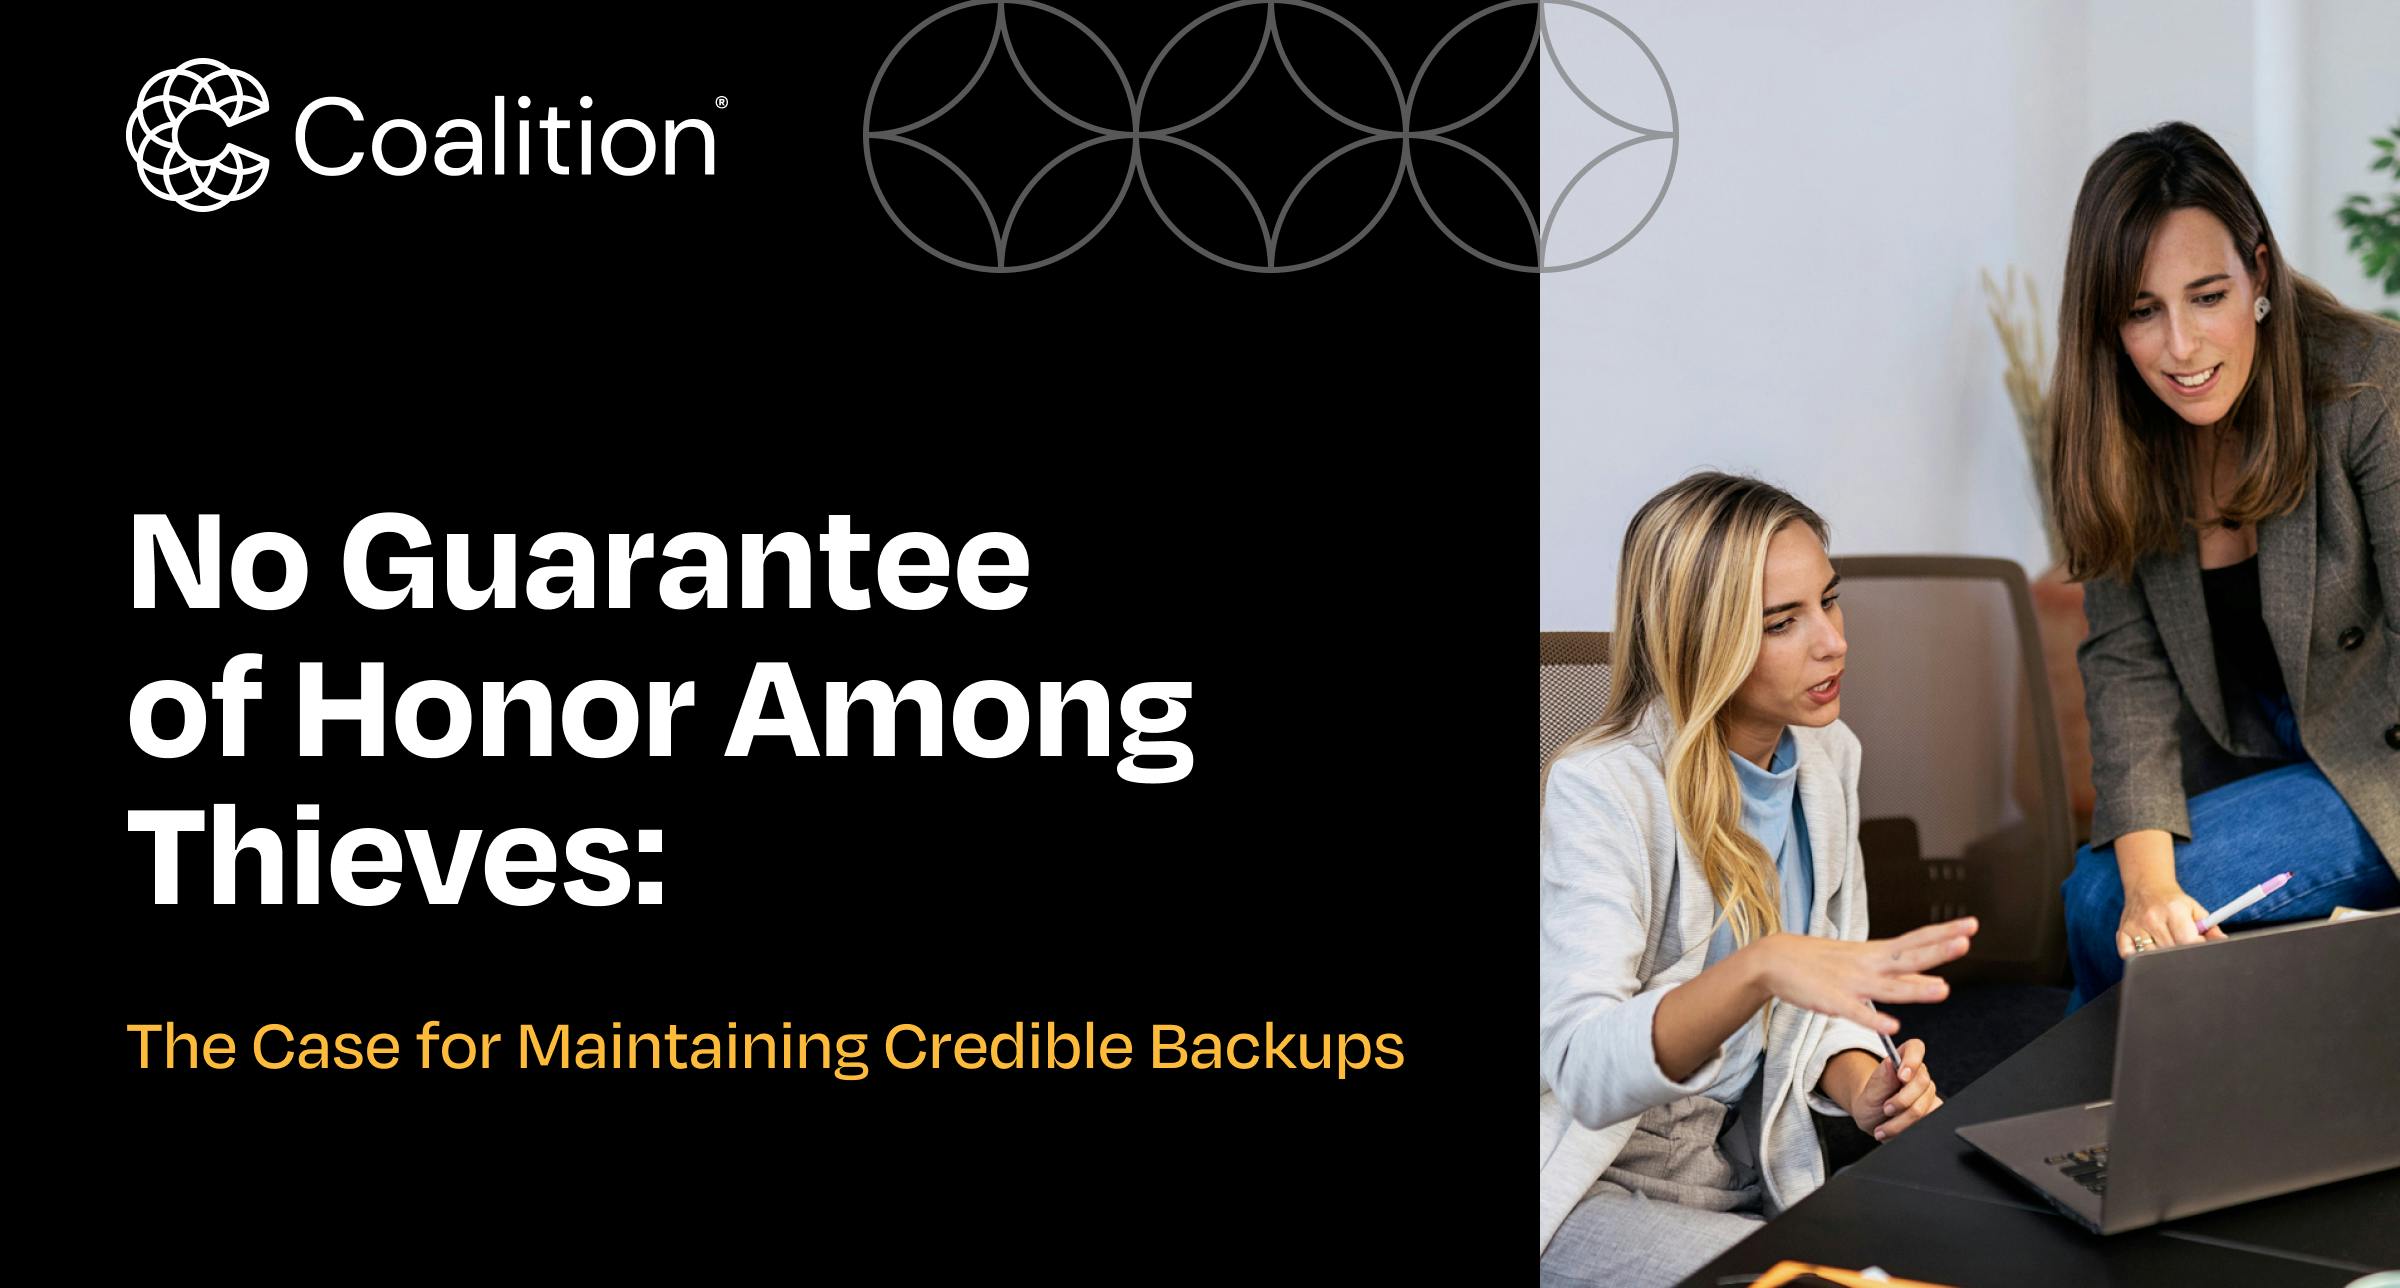 Maintaining Credible Data Backups to Minimize Downtime